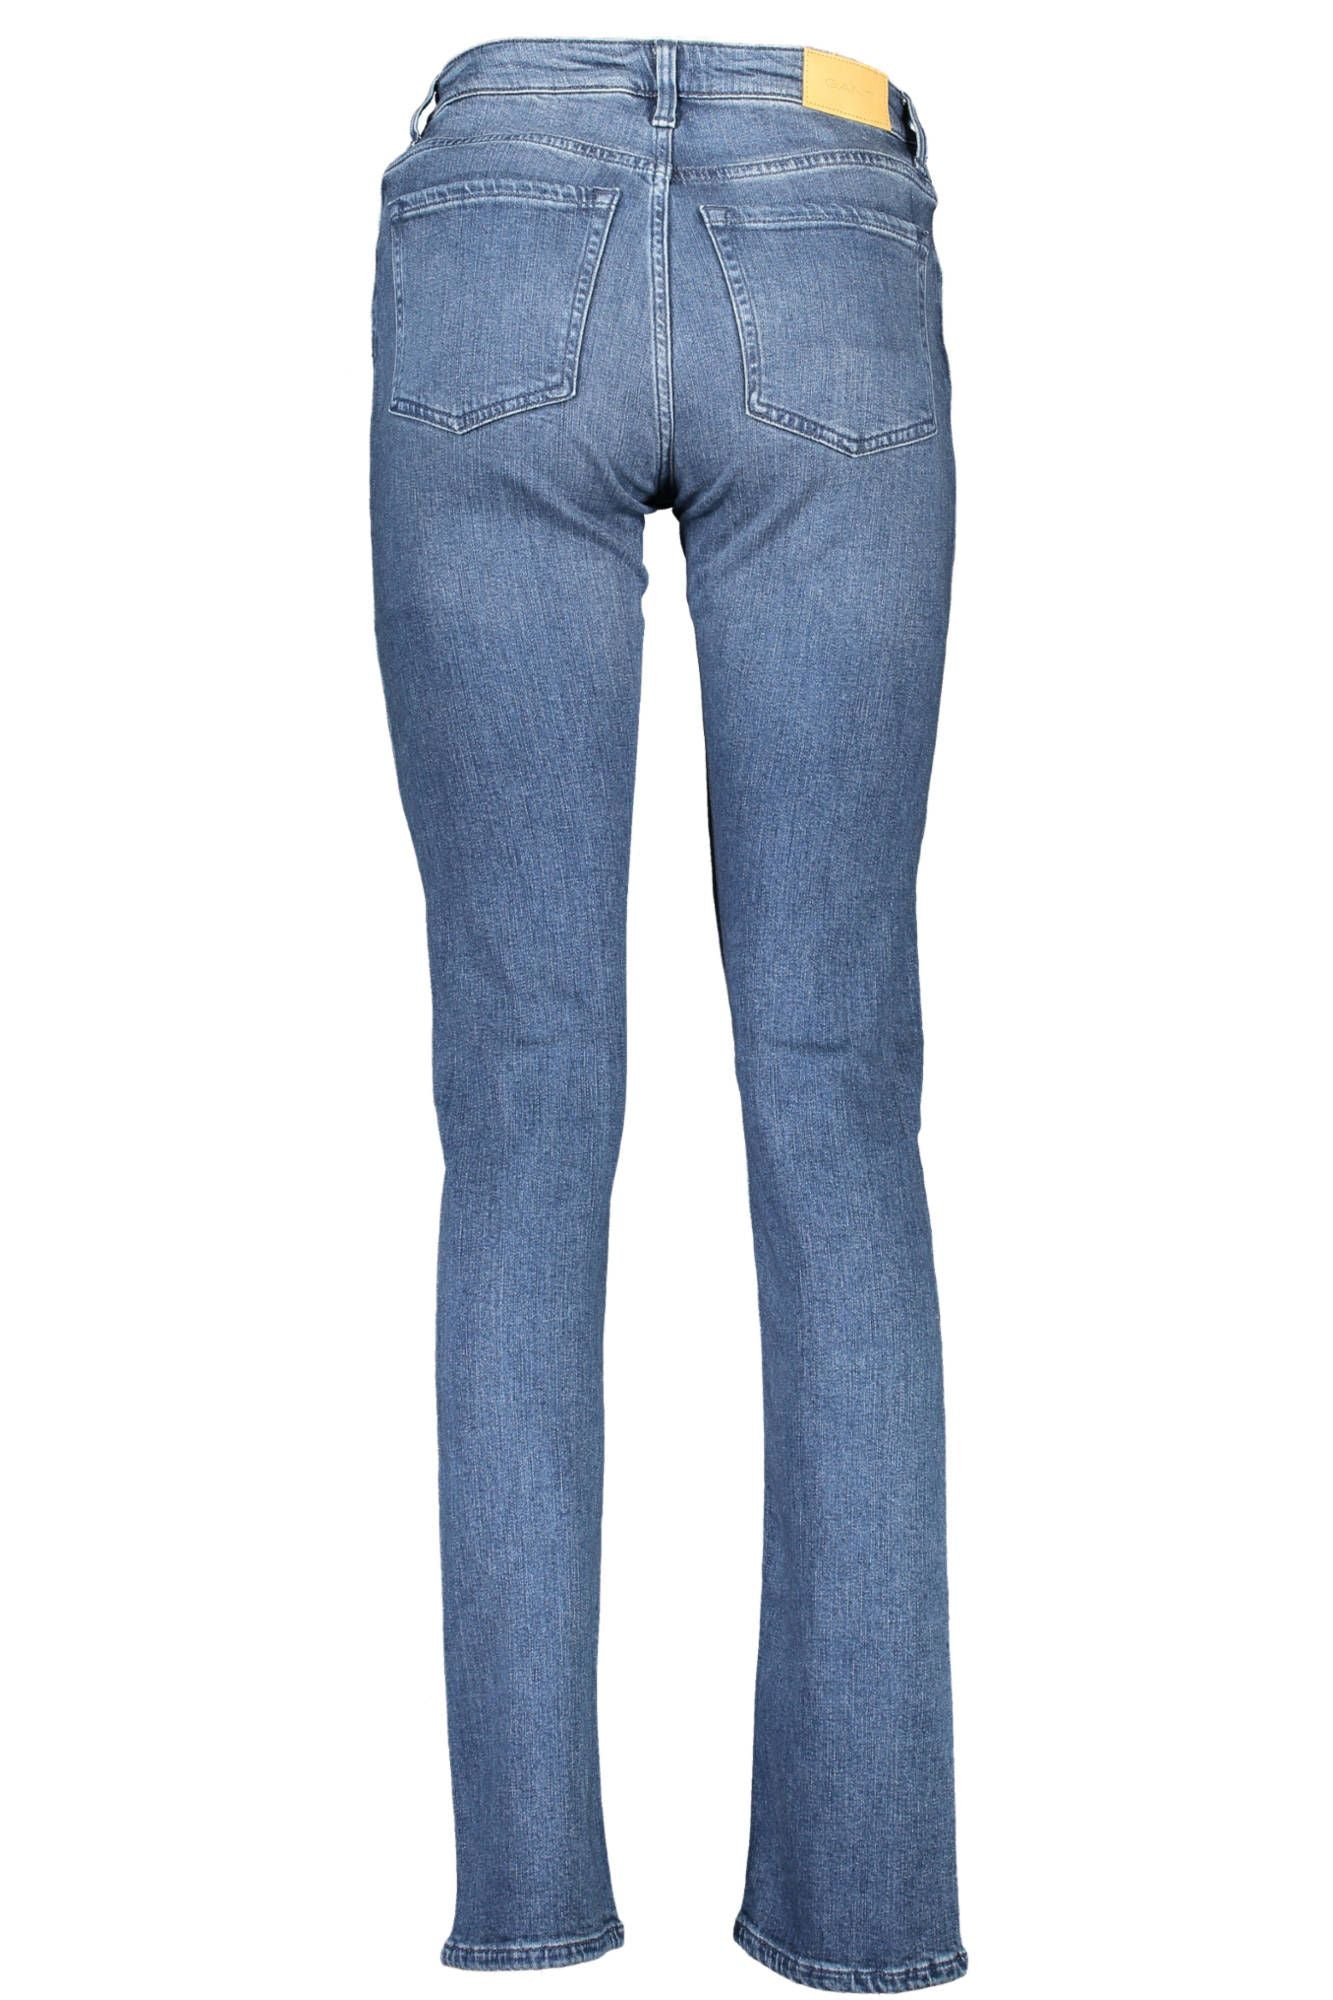 Chic Faded Blue Button-Zip Jeans